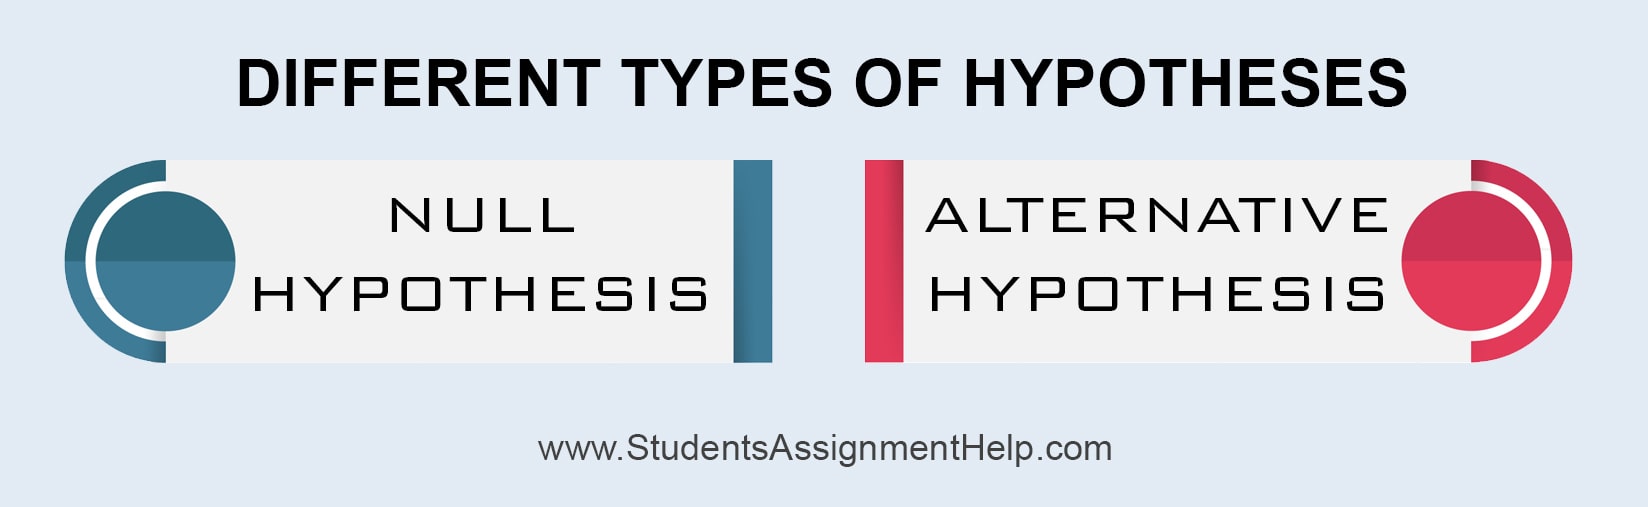 hypothesis types and examples